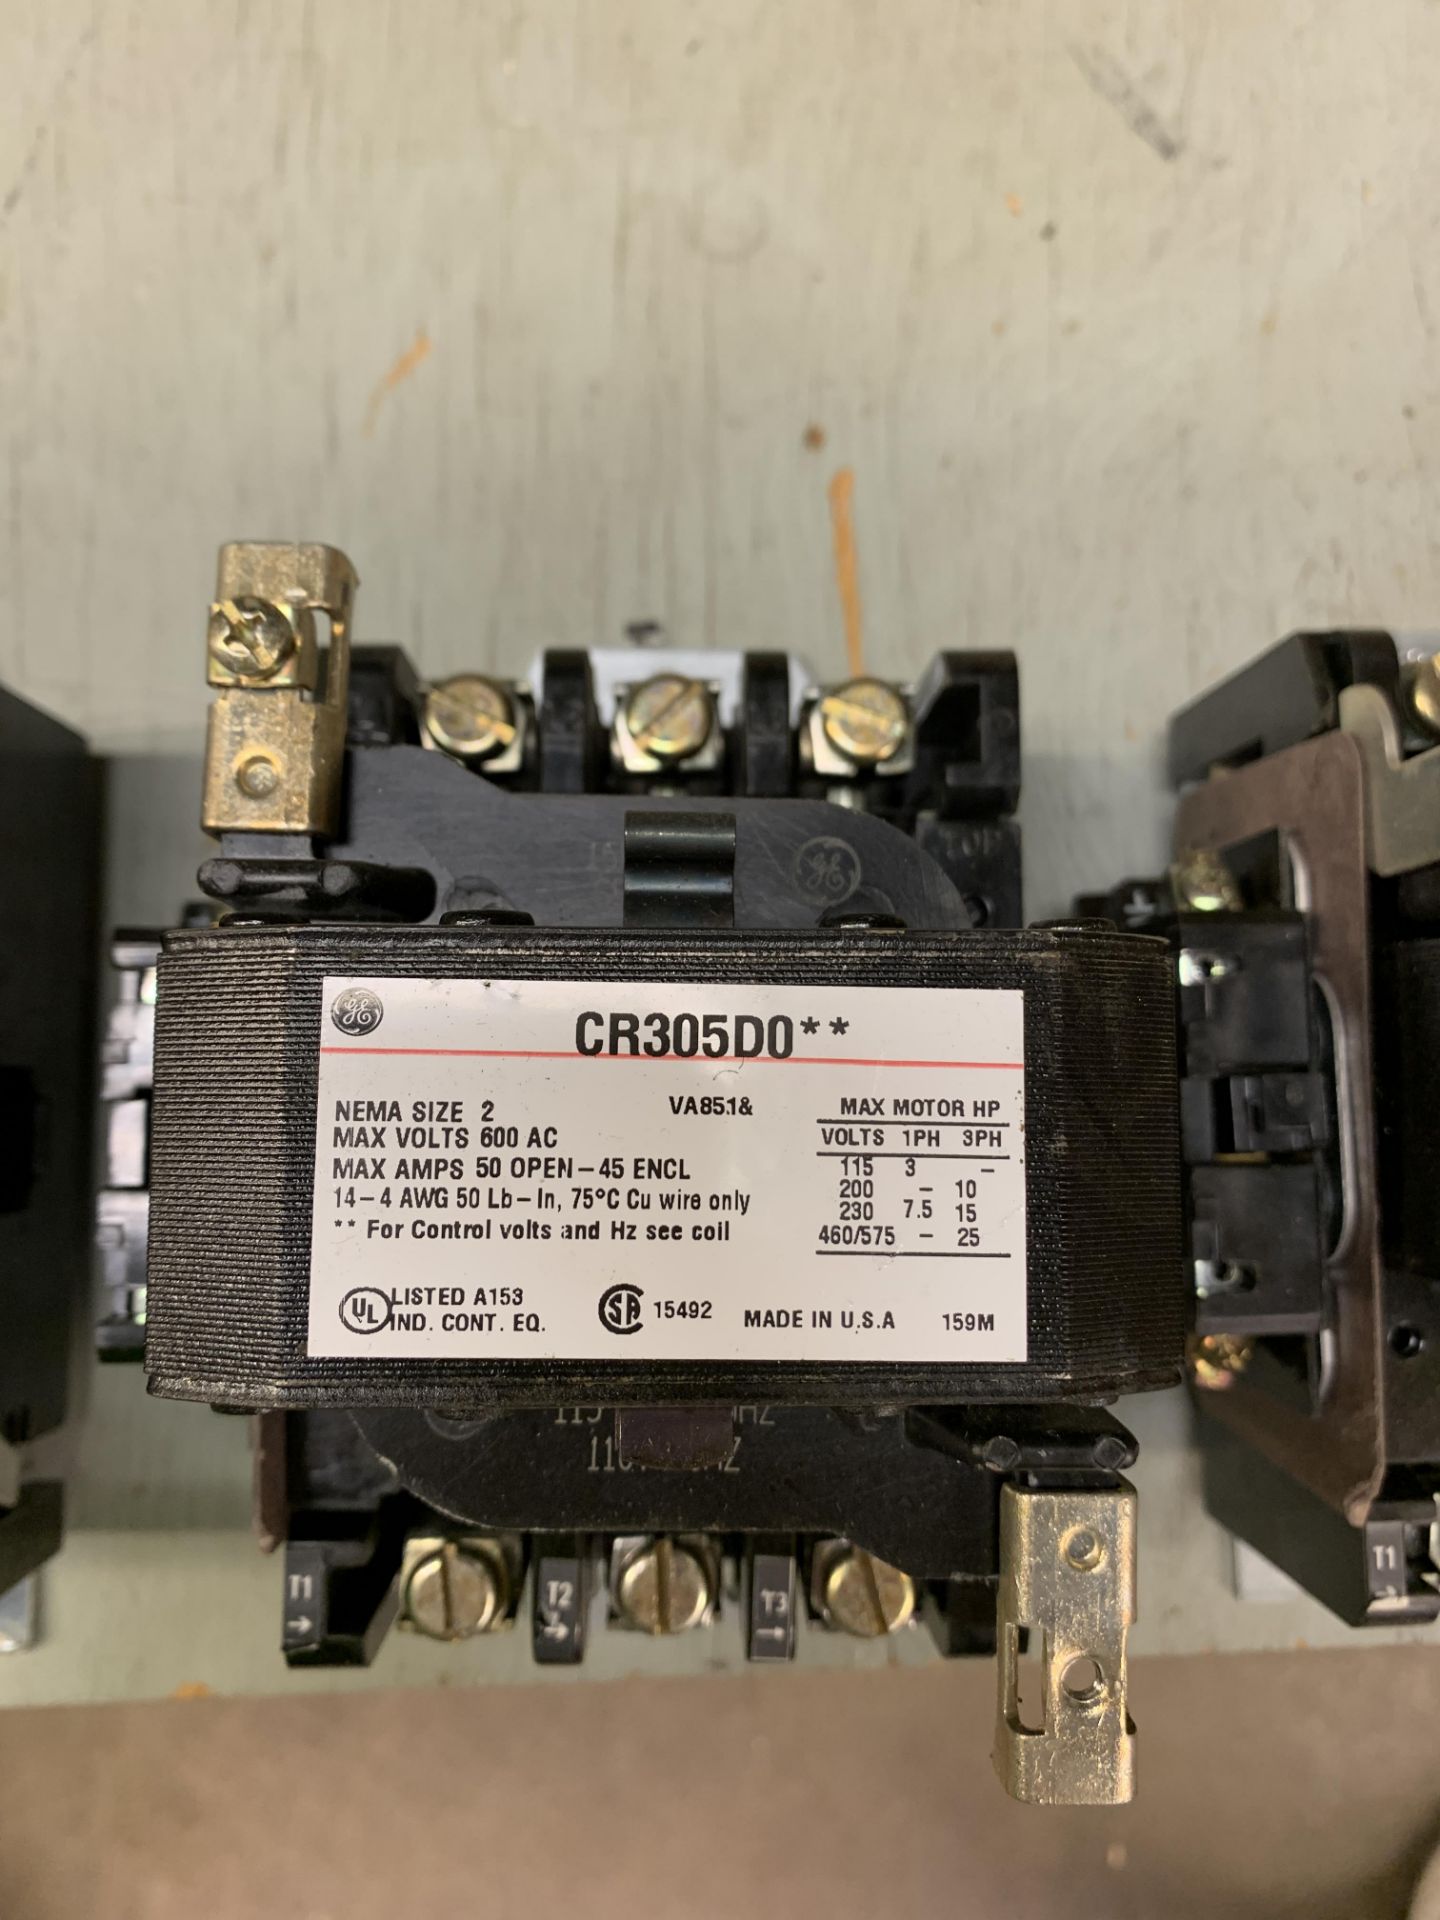 LOT OF (4) GE M-CR305D0 SWITCH RELAYS -- 1901 NOBLE DR EAST CLEVELAND OHIO 44112 - Image 2 of 3